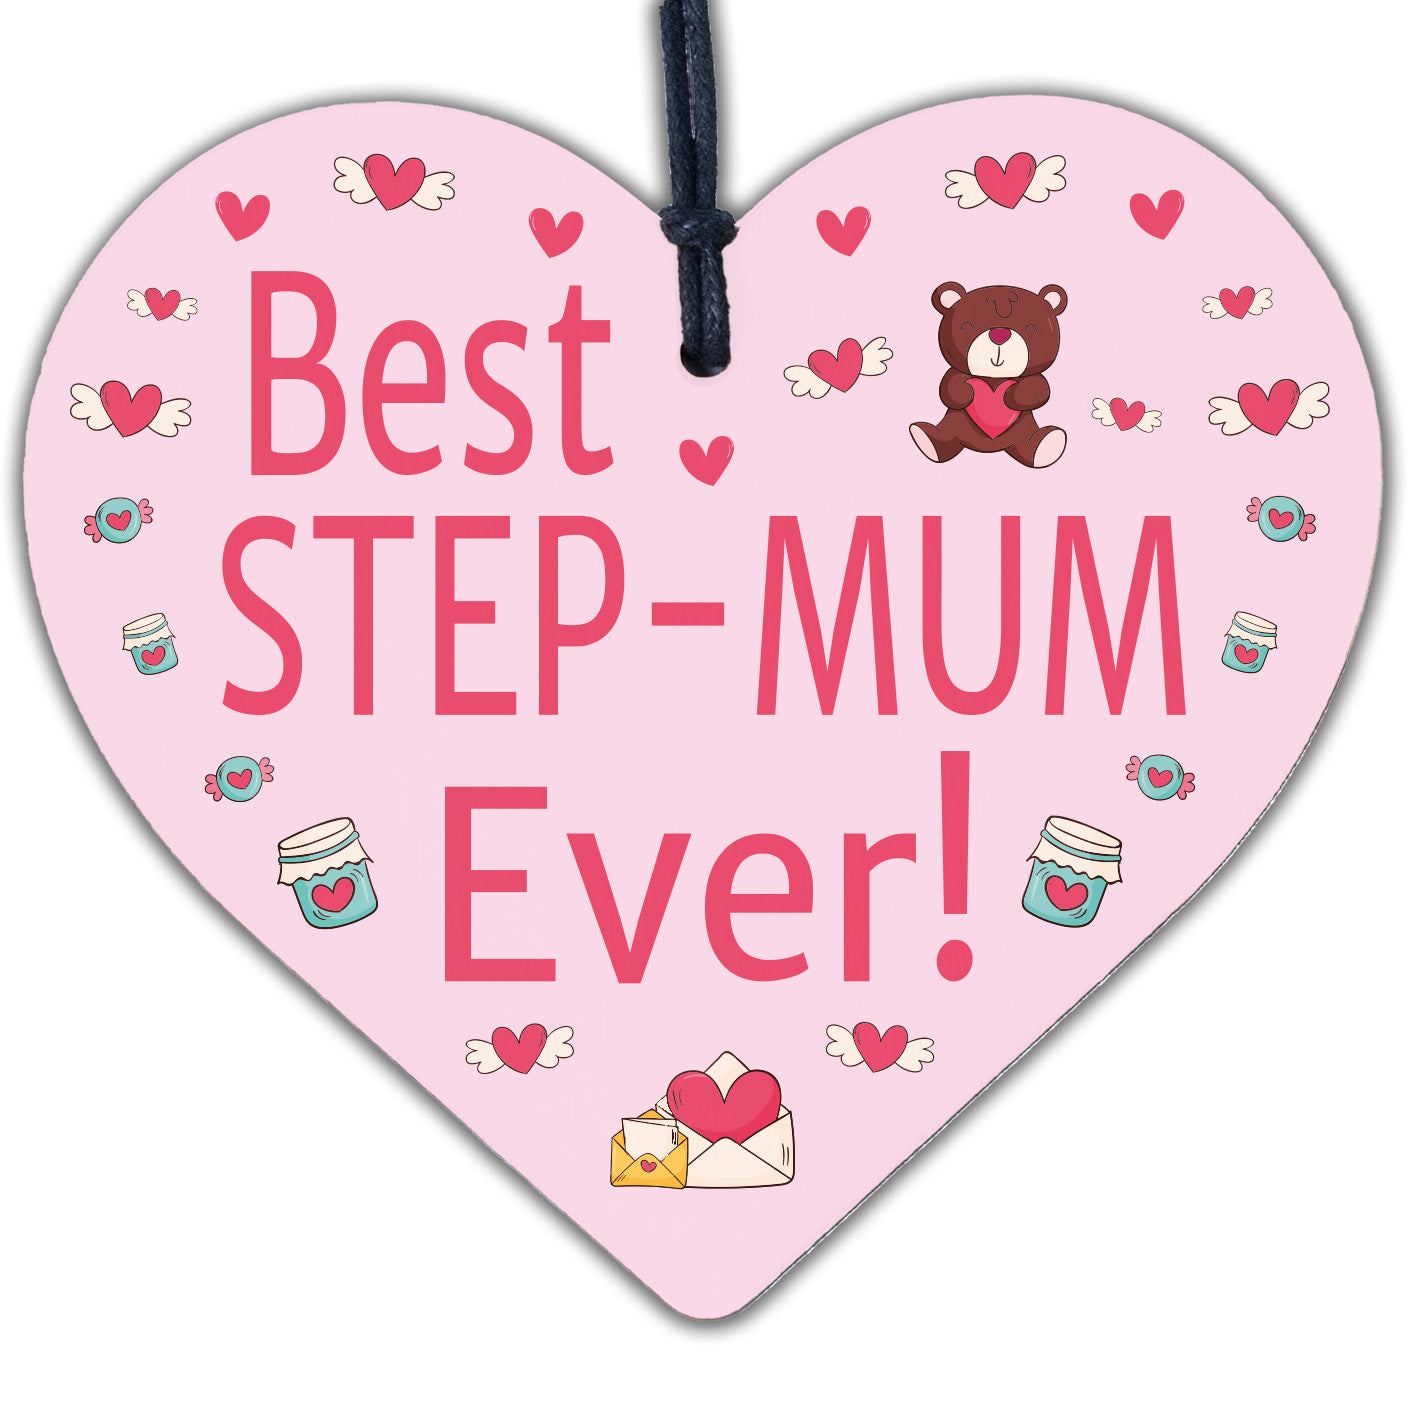 Best Step Mum Gifts Mirror Heart Gift For Mum Novelty Birthday Mothers Day Gifts